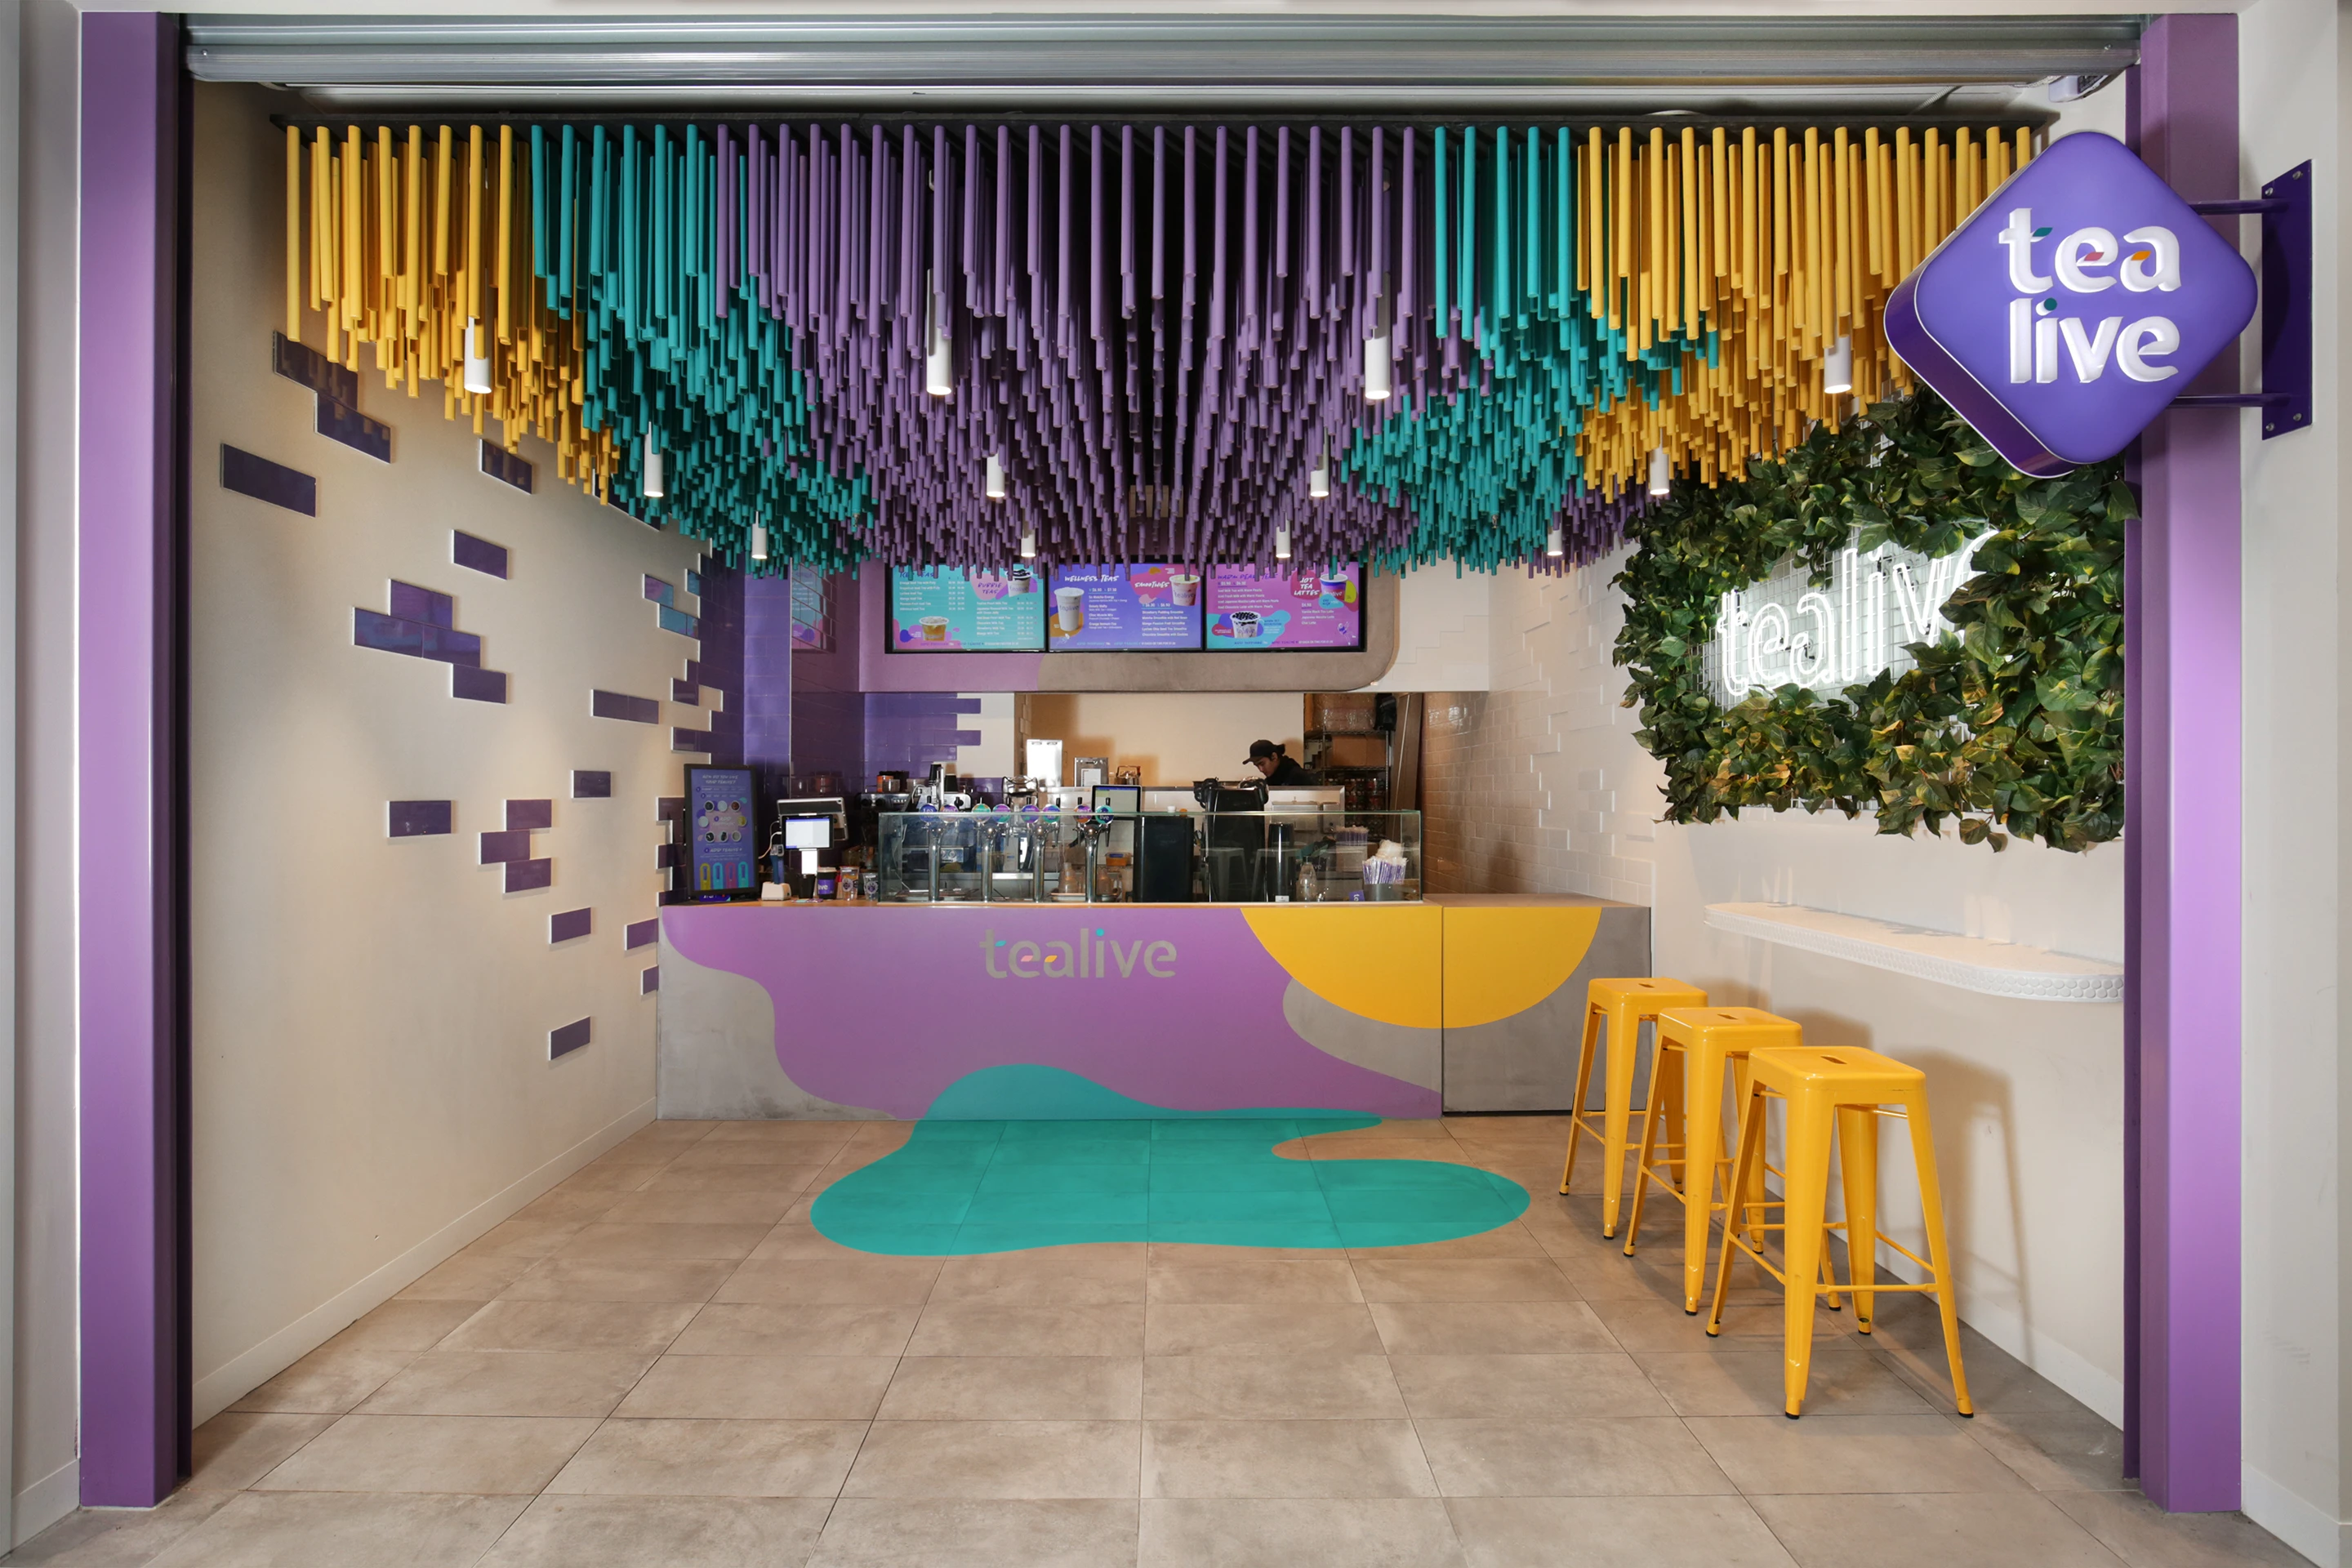 shop interior with yellow, teal and purple ceiling and bench